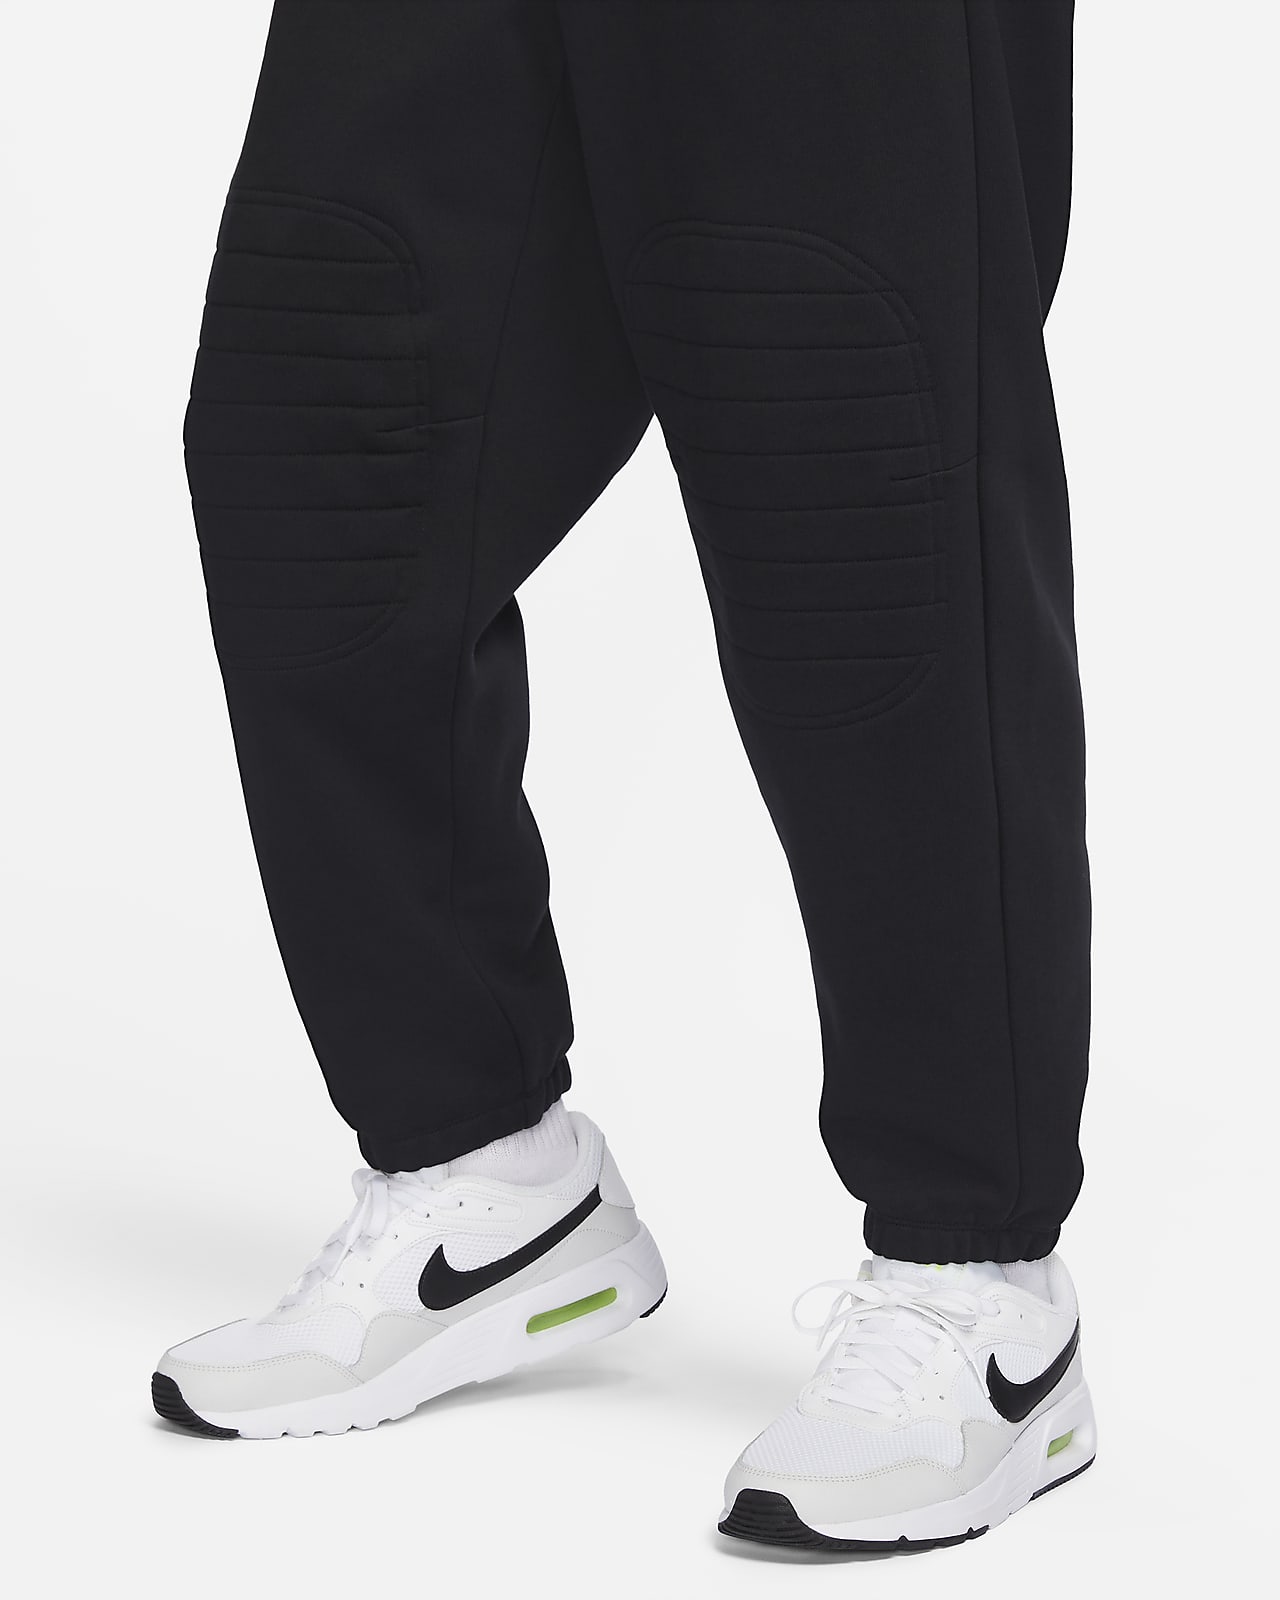 Boost Up Mens Sports Trousers | Trex